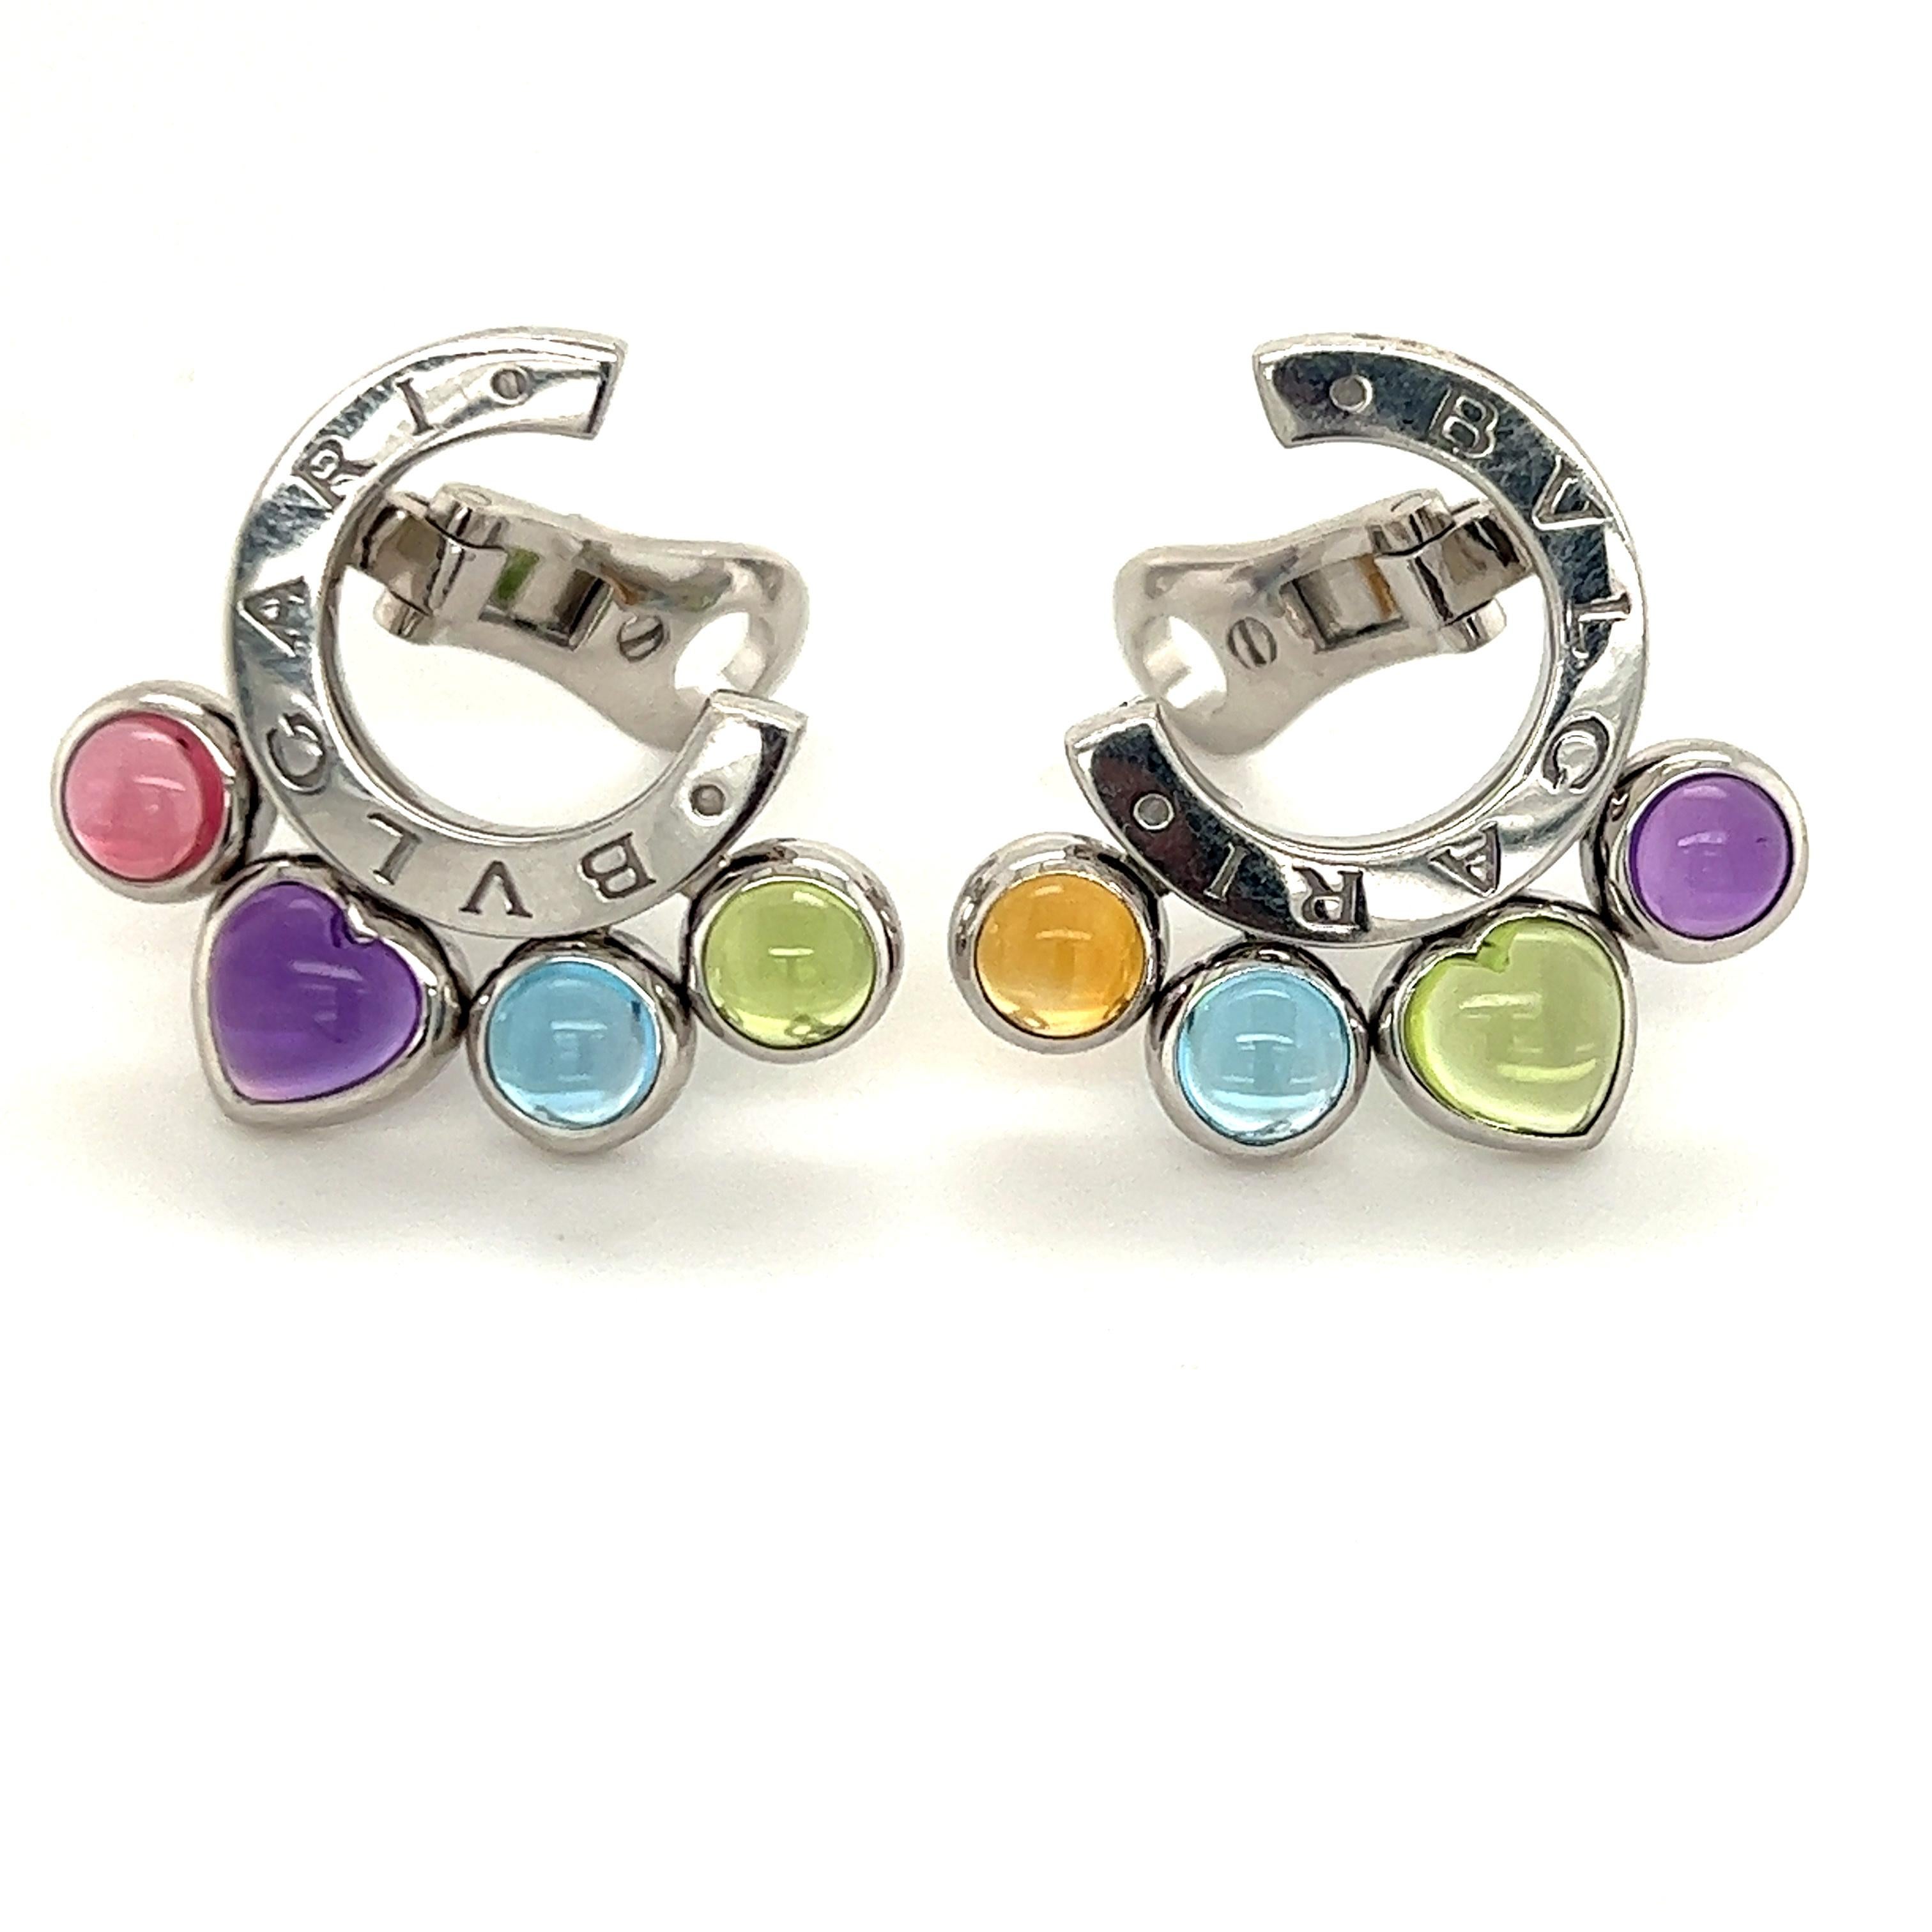 Pair of beautiful earrings crafted by famed designer Bvlgari. The earrings are from the Allegra collection and pop with vibrant colors. The pair is crafted in 18k white gold and show a high polished half circle engraved Bvlgari. Each earring has 4